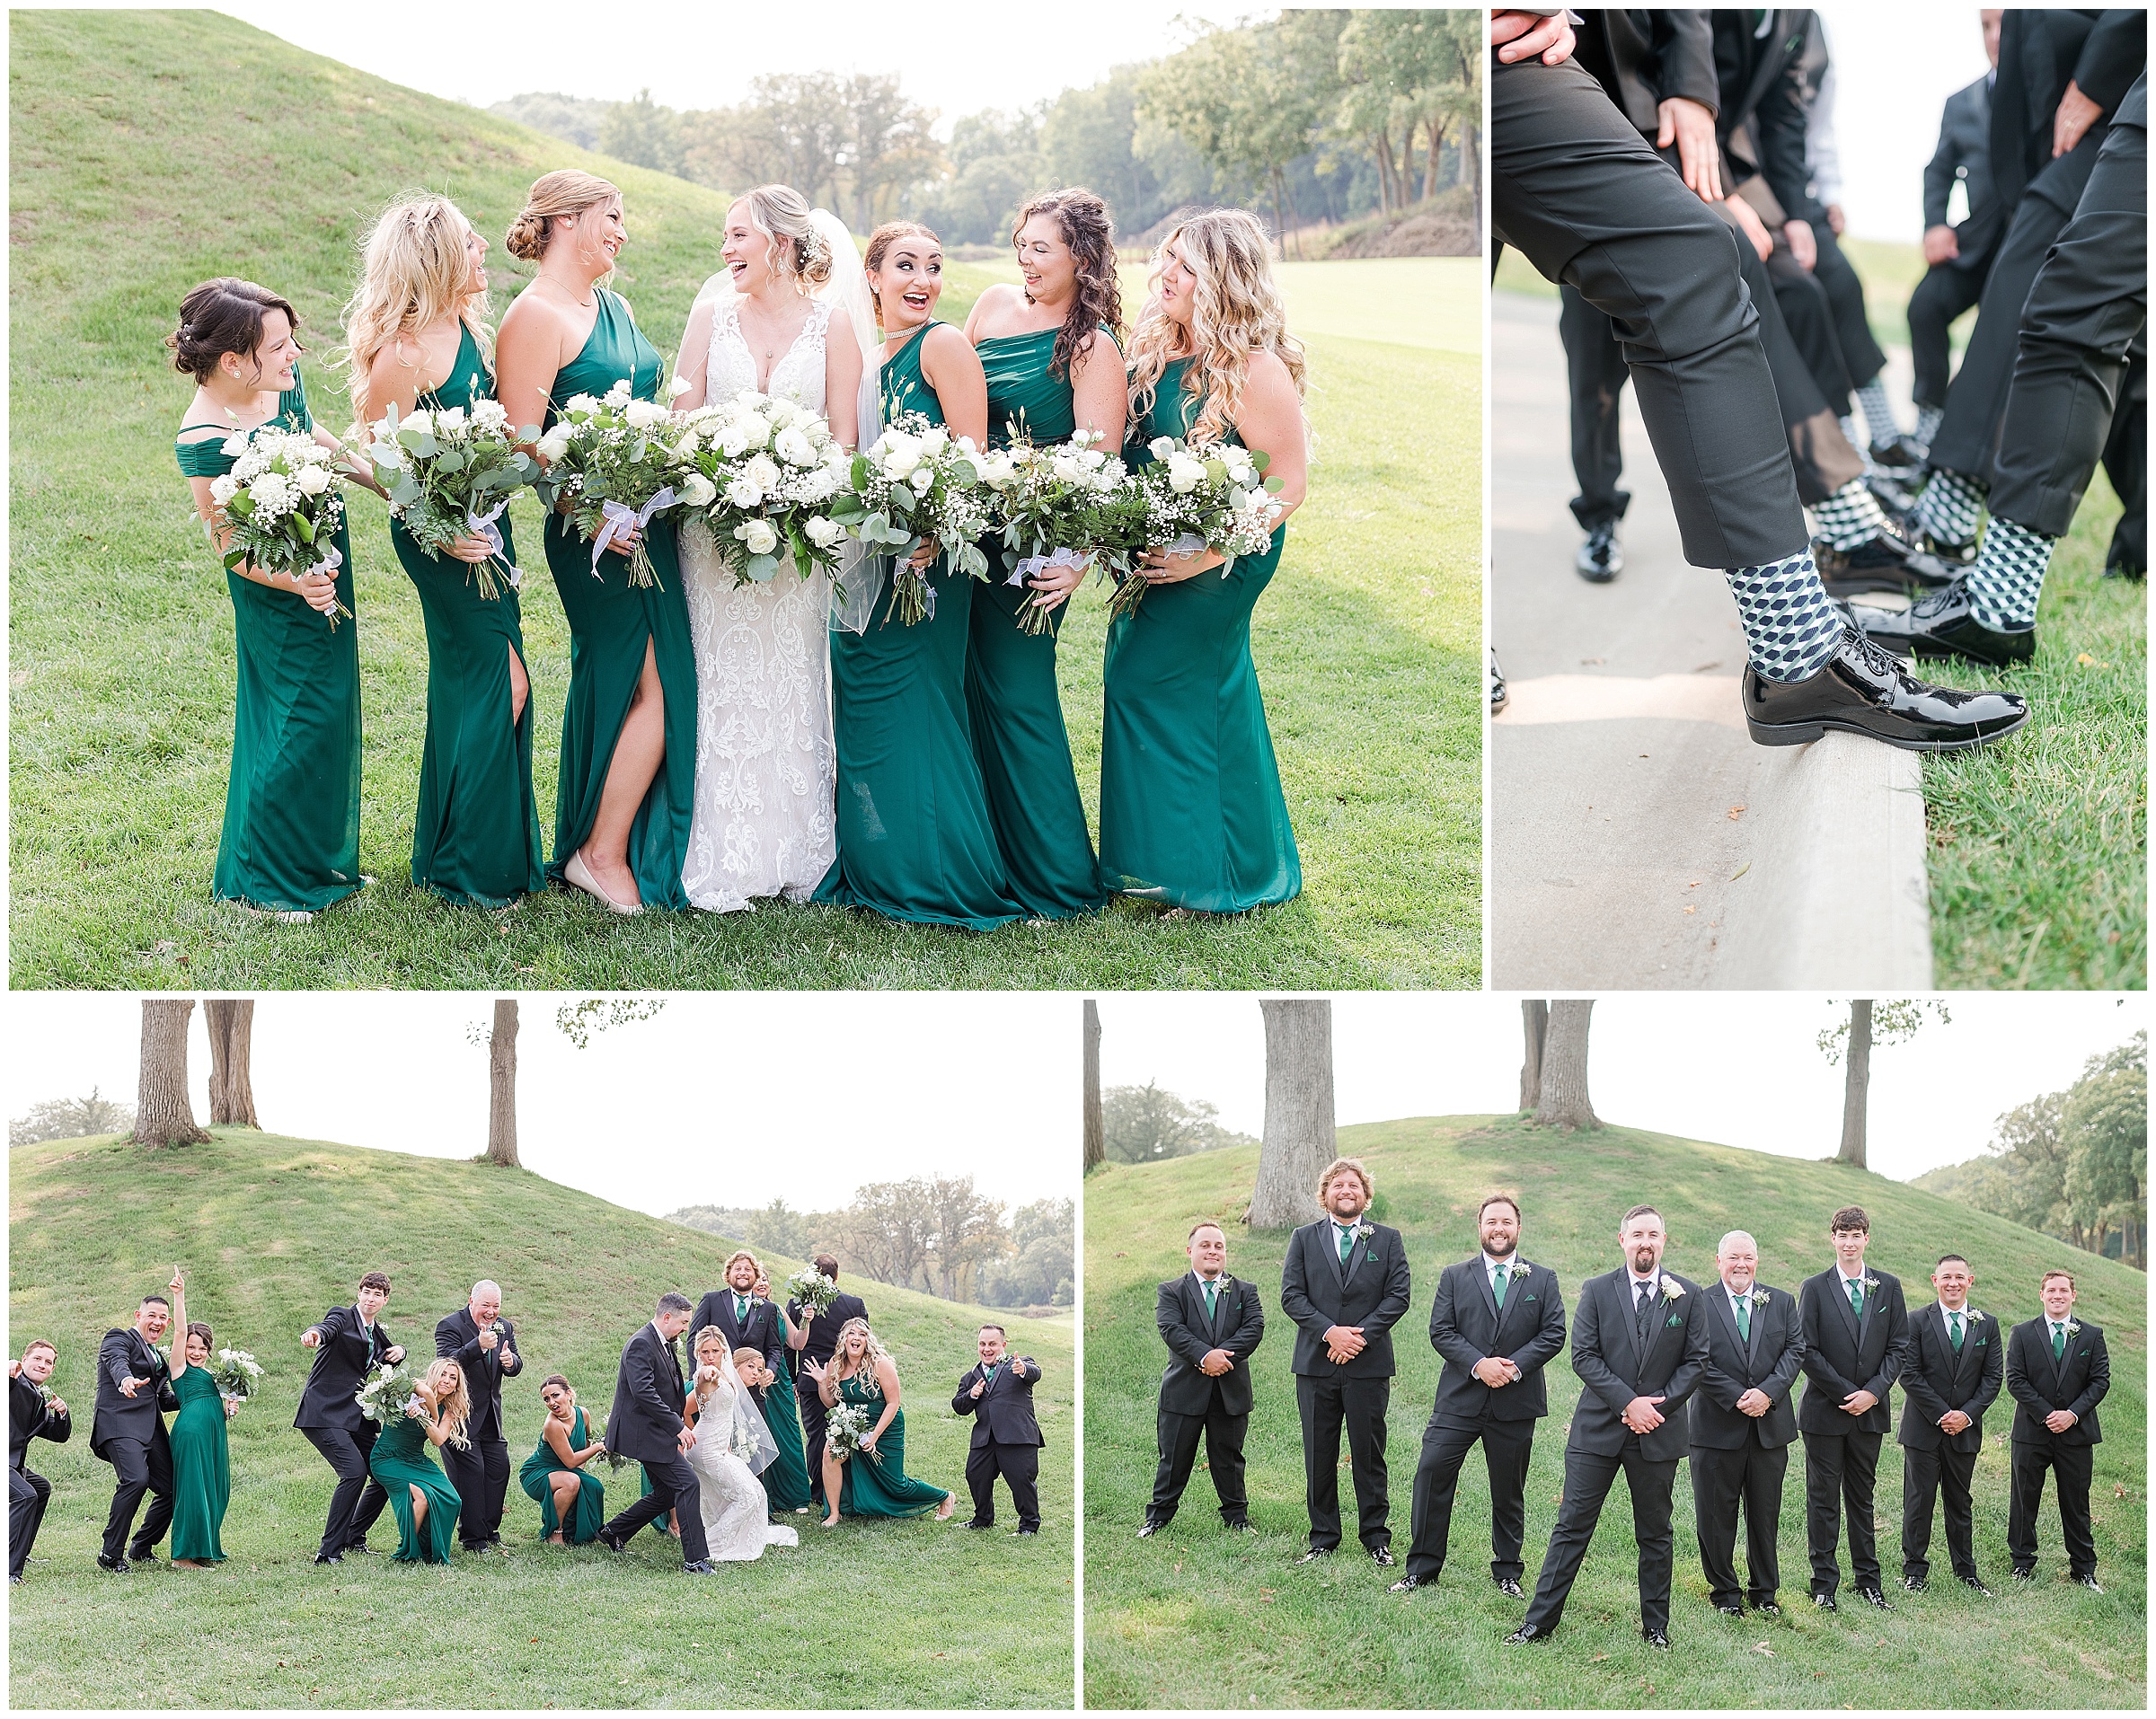 Outdoor wedding day portraits of the bridal party